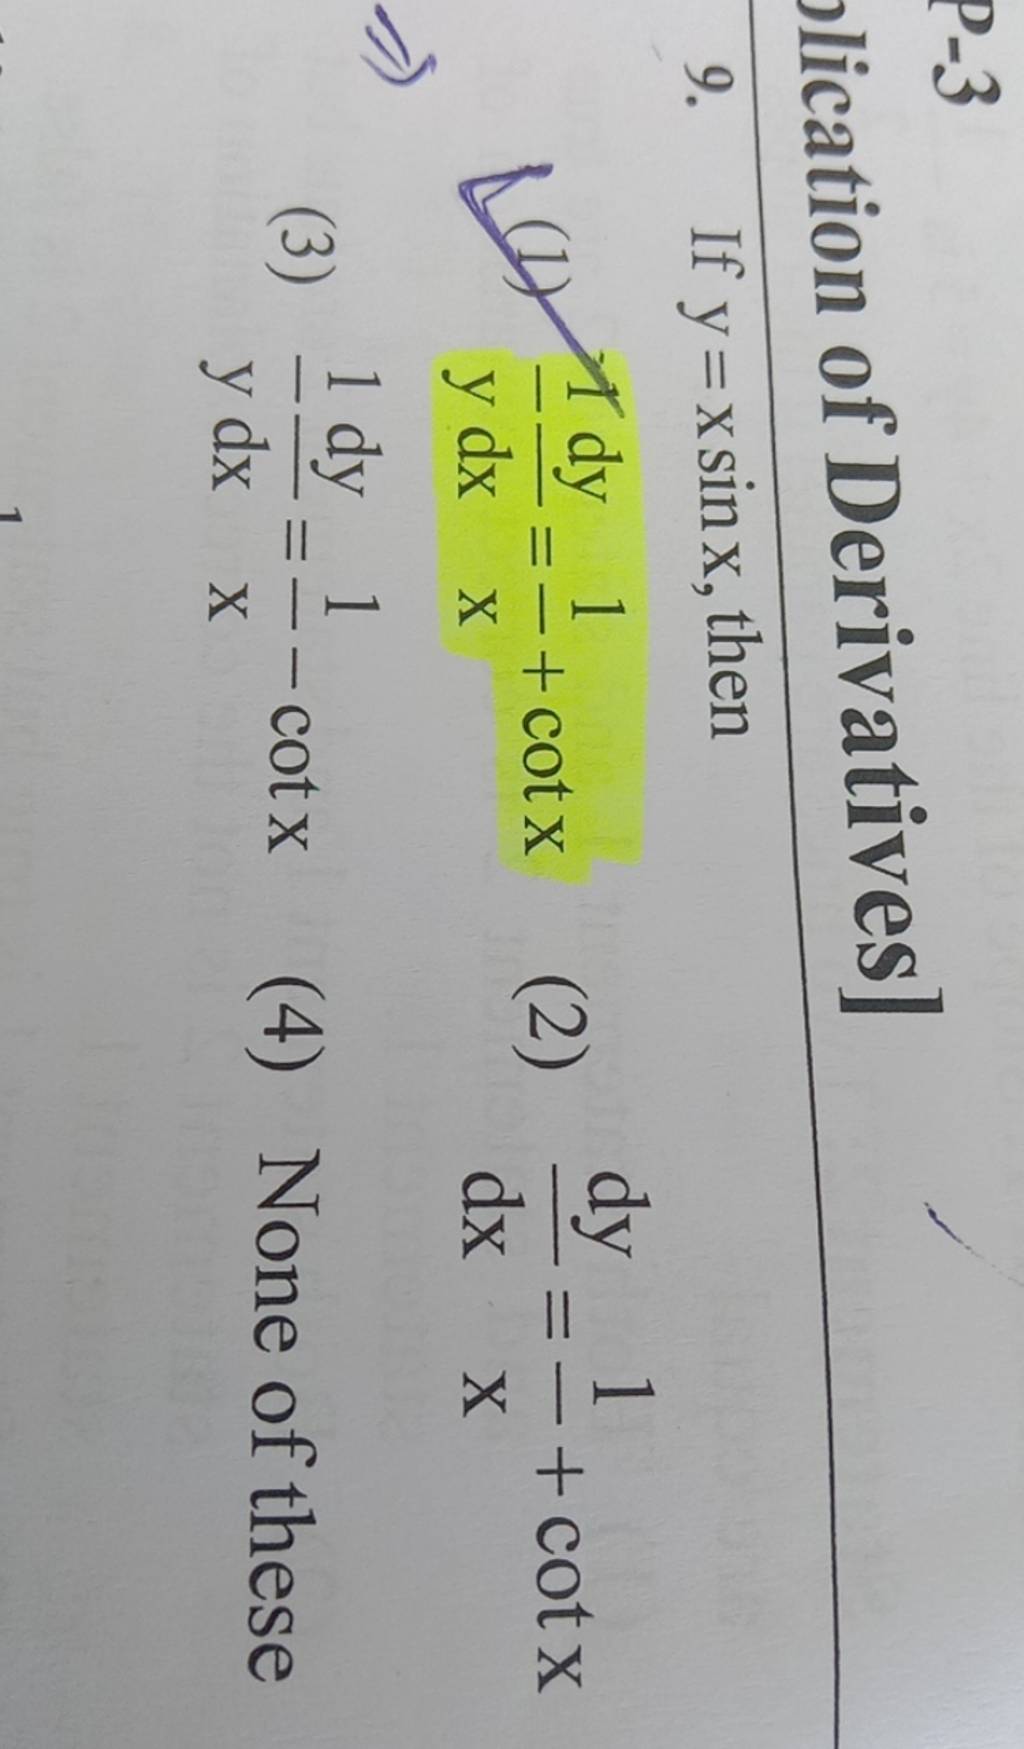 P-3 lication of Derivatives] 9. If y=xsinx, then